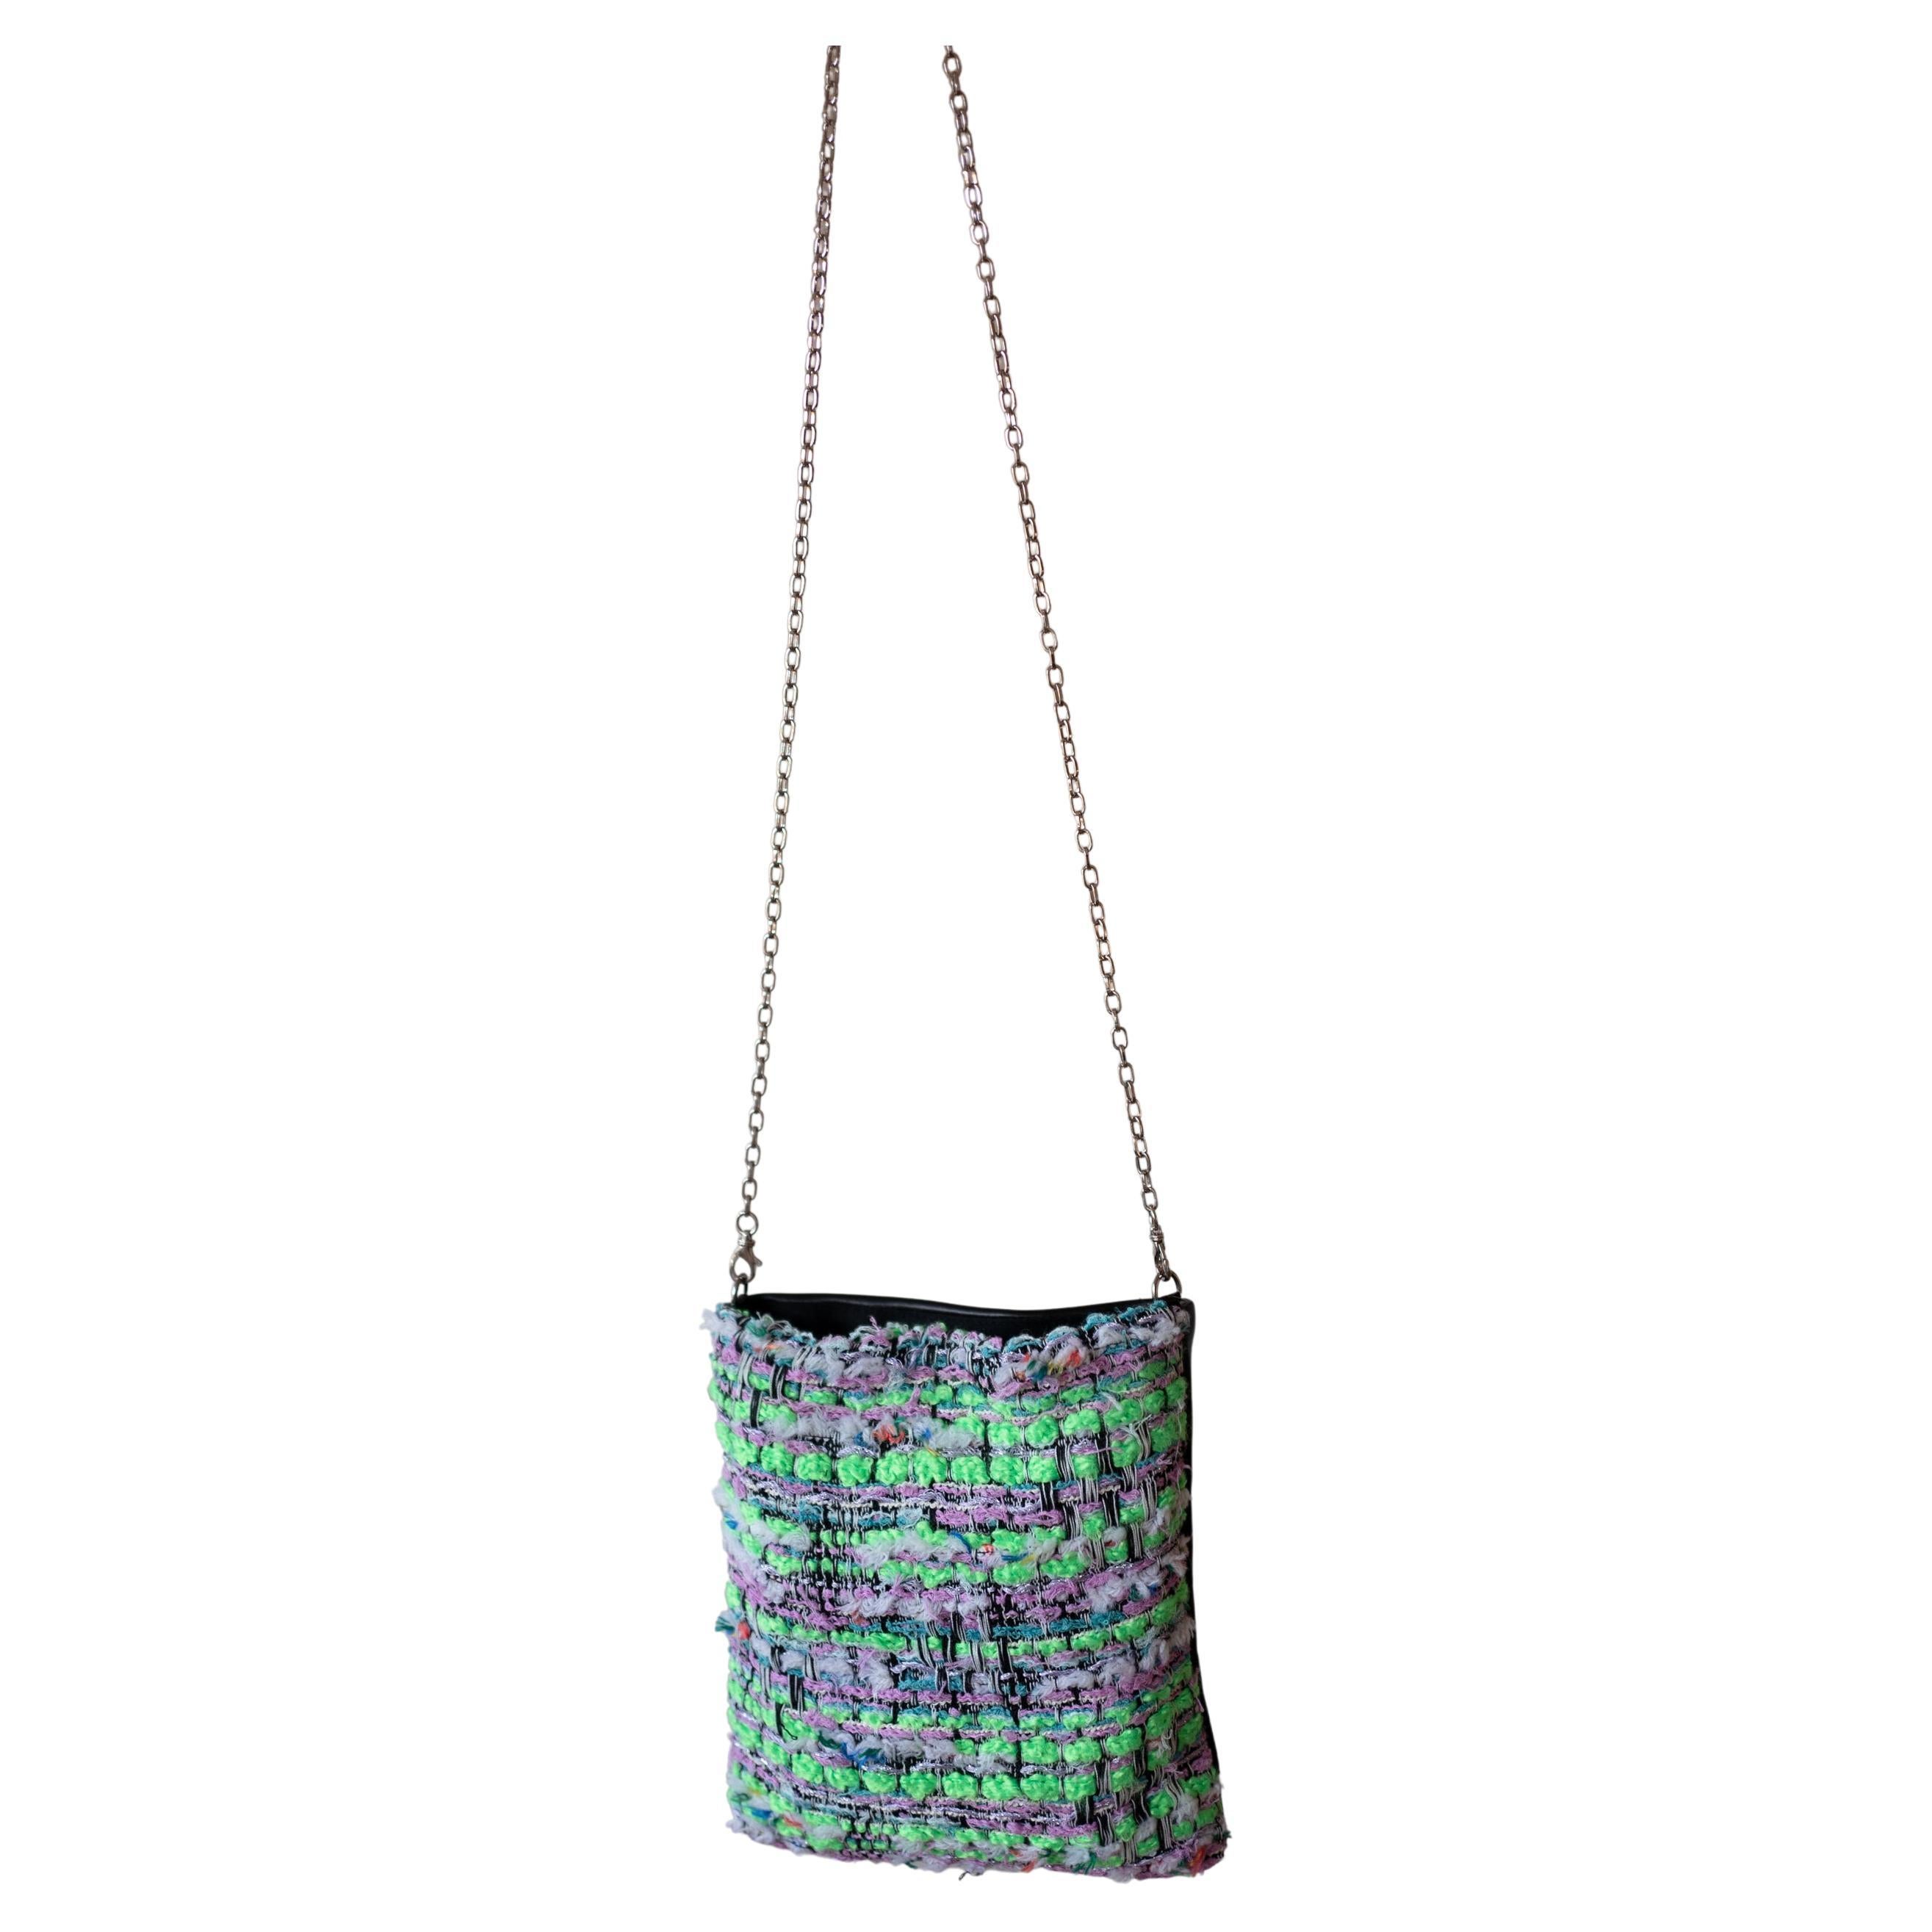 French Neon Green Tweed and Black Italian Napa Leather with Long Shoulder Chain Evening Bag J Dauphin

Size: Height 21 cm, Width 17 cm, Length of Chain including Hooks 111 cm

Brand: J Dauphin

One of a kind Leather Bag,  Frenh Green Multi Color